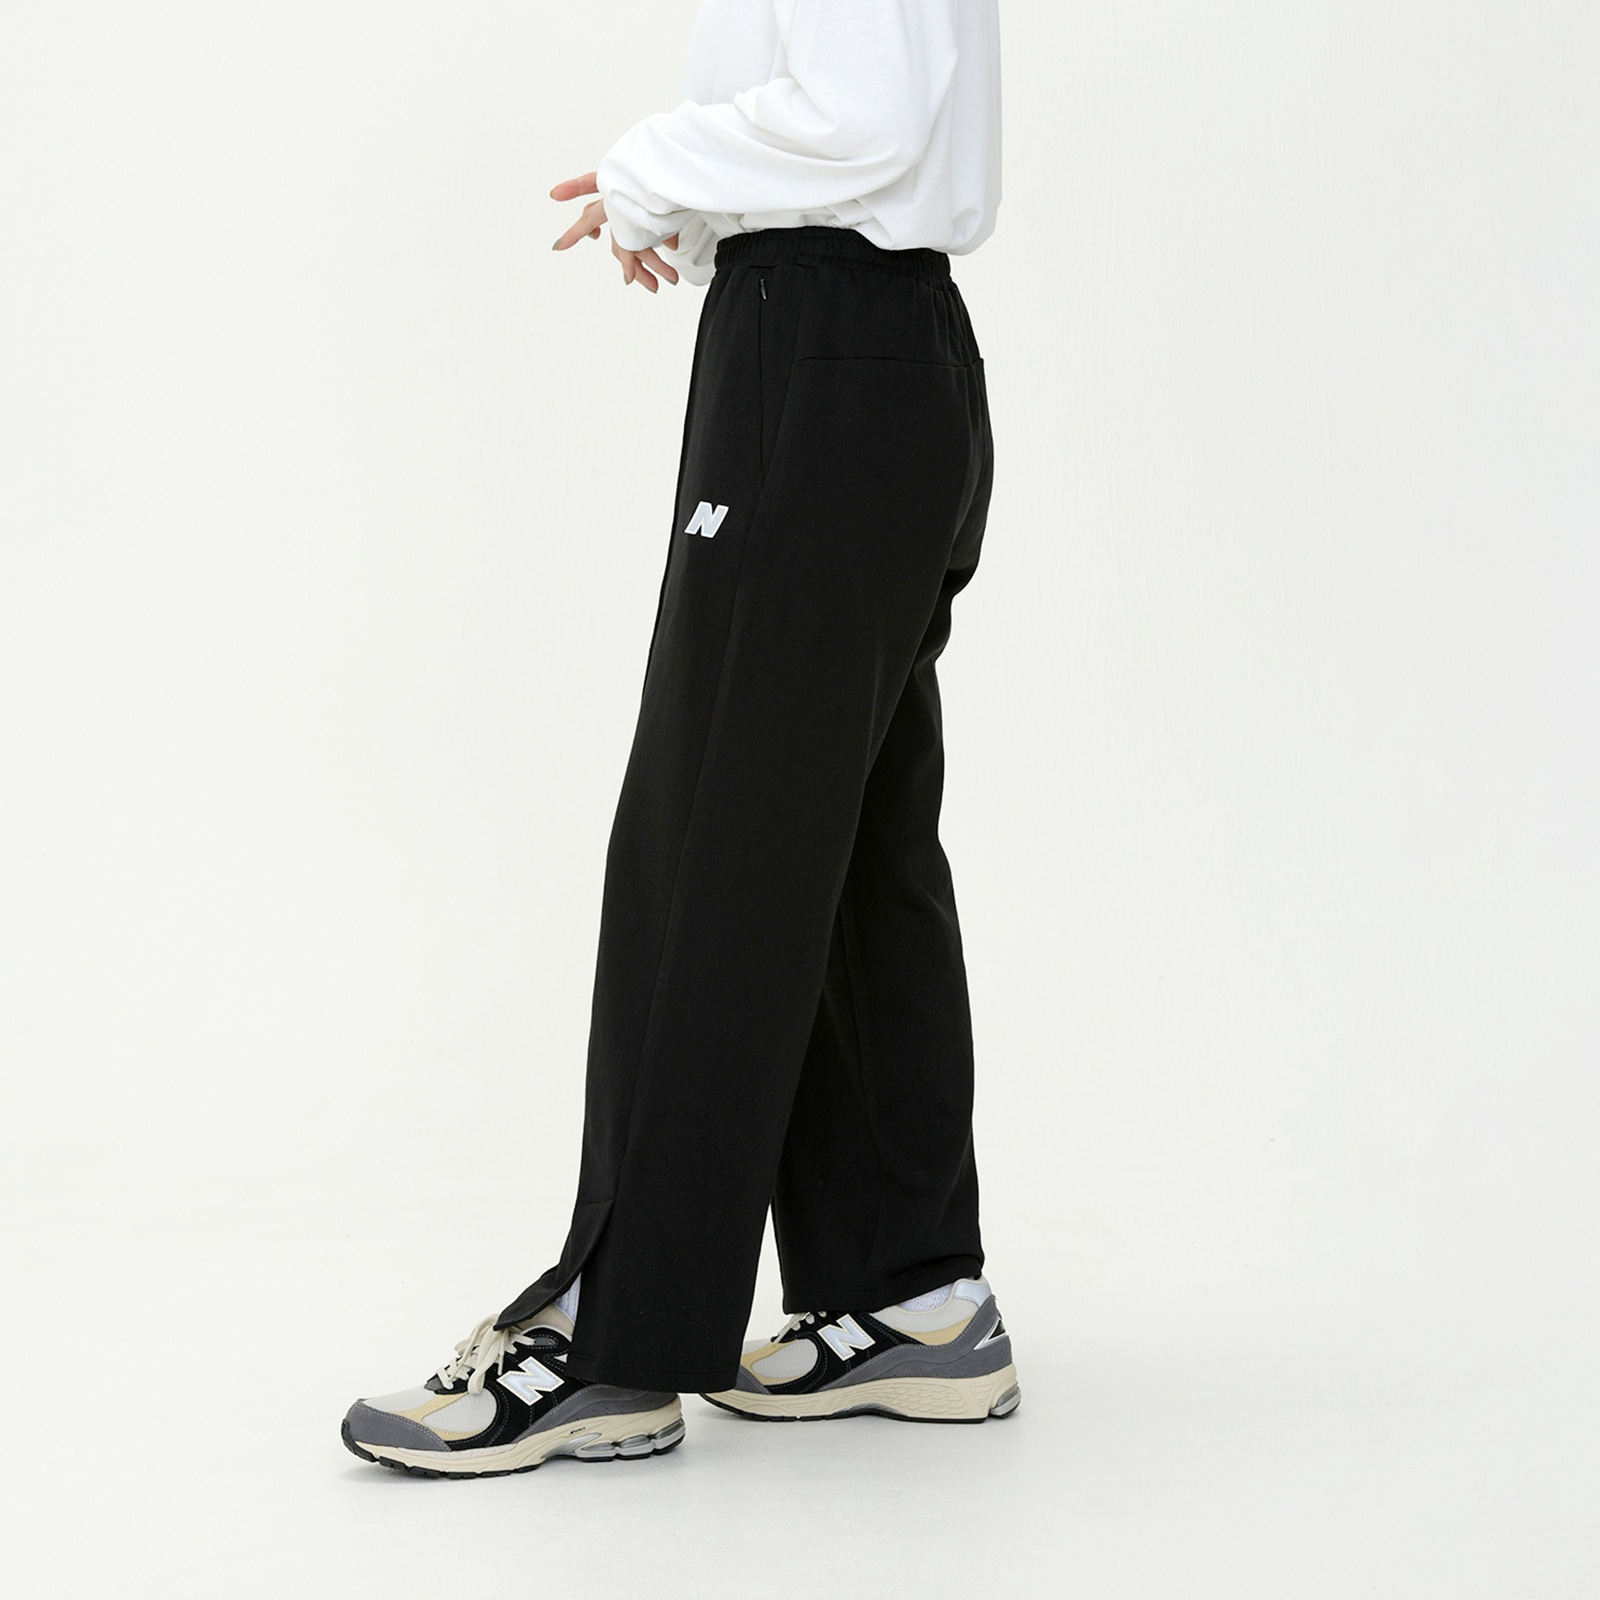 NB公式アウトレット】ニューバランス | MET24 N Wide Pants|New 